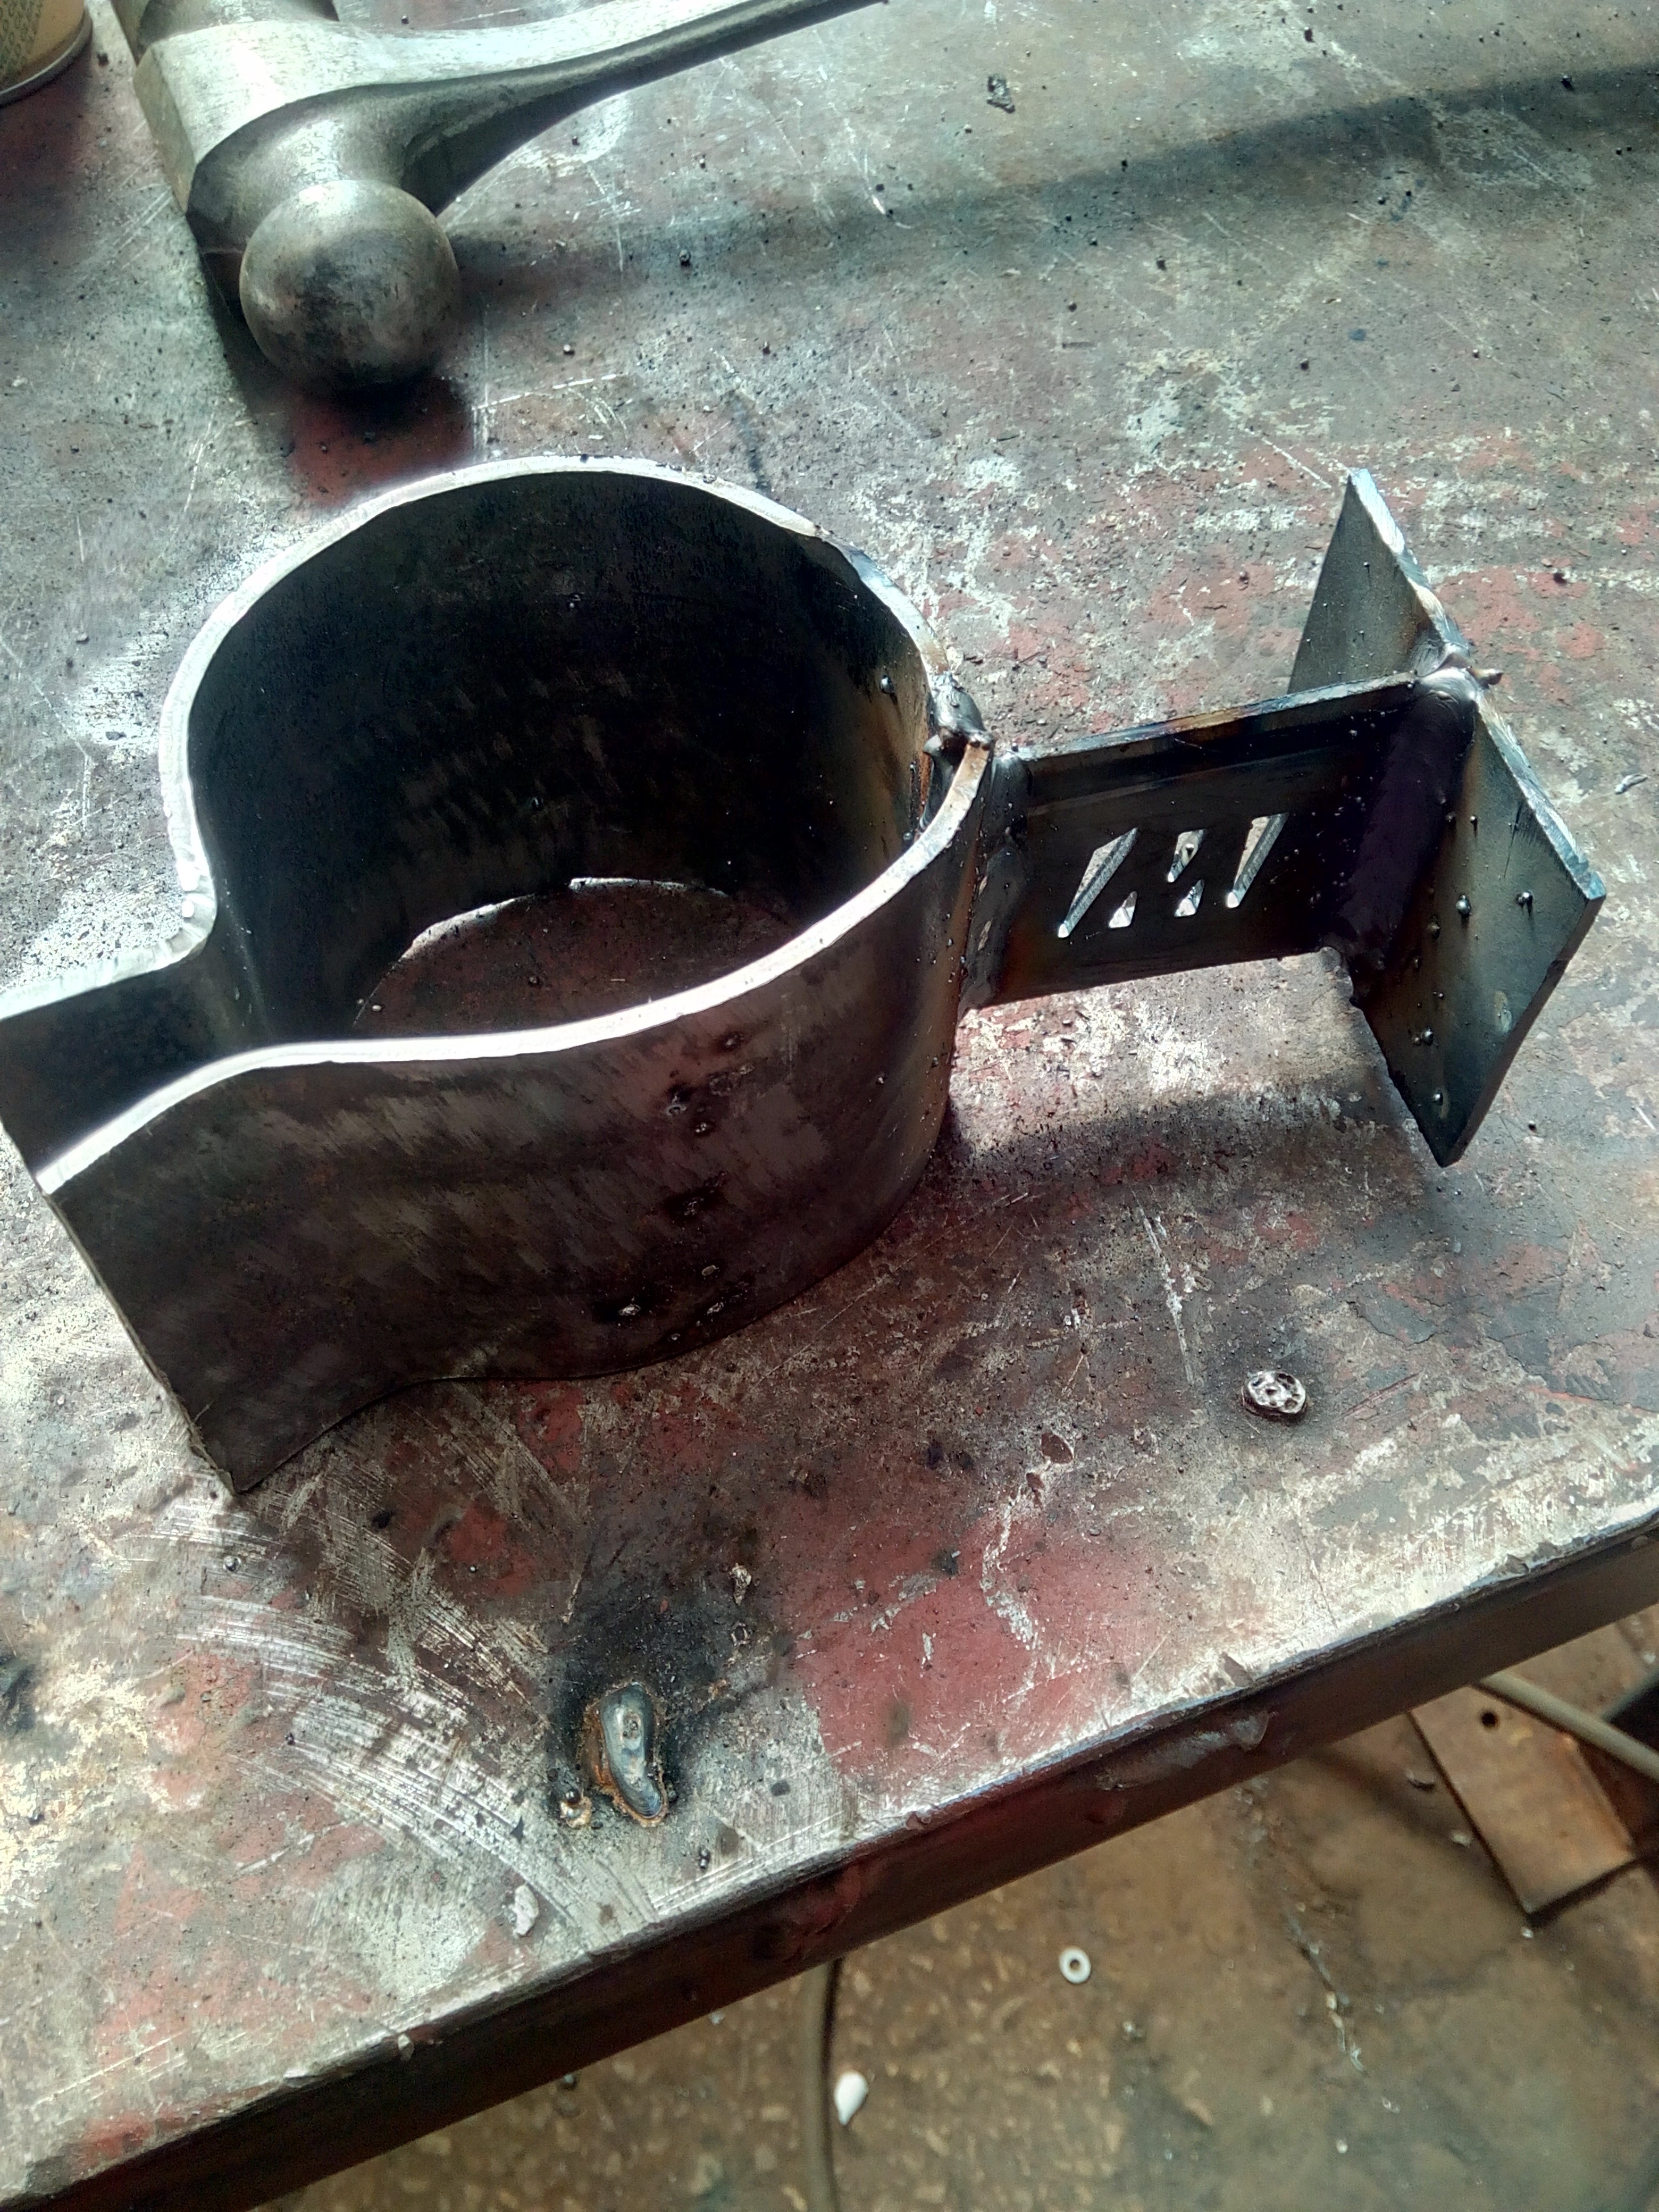 The same freshly-welded bracket, now sitting in a different
orientation on the welding table. The M logo, clamping bolt, and
several large globs of welding spatter, are clearly visible.